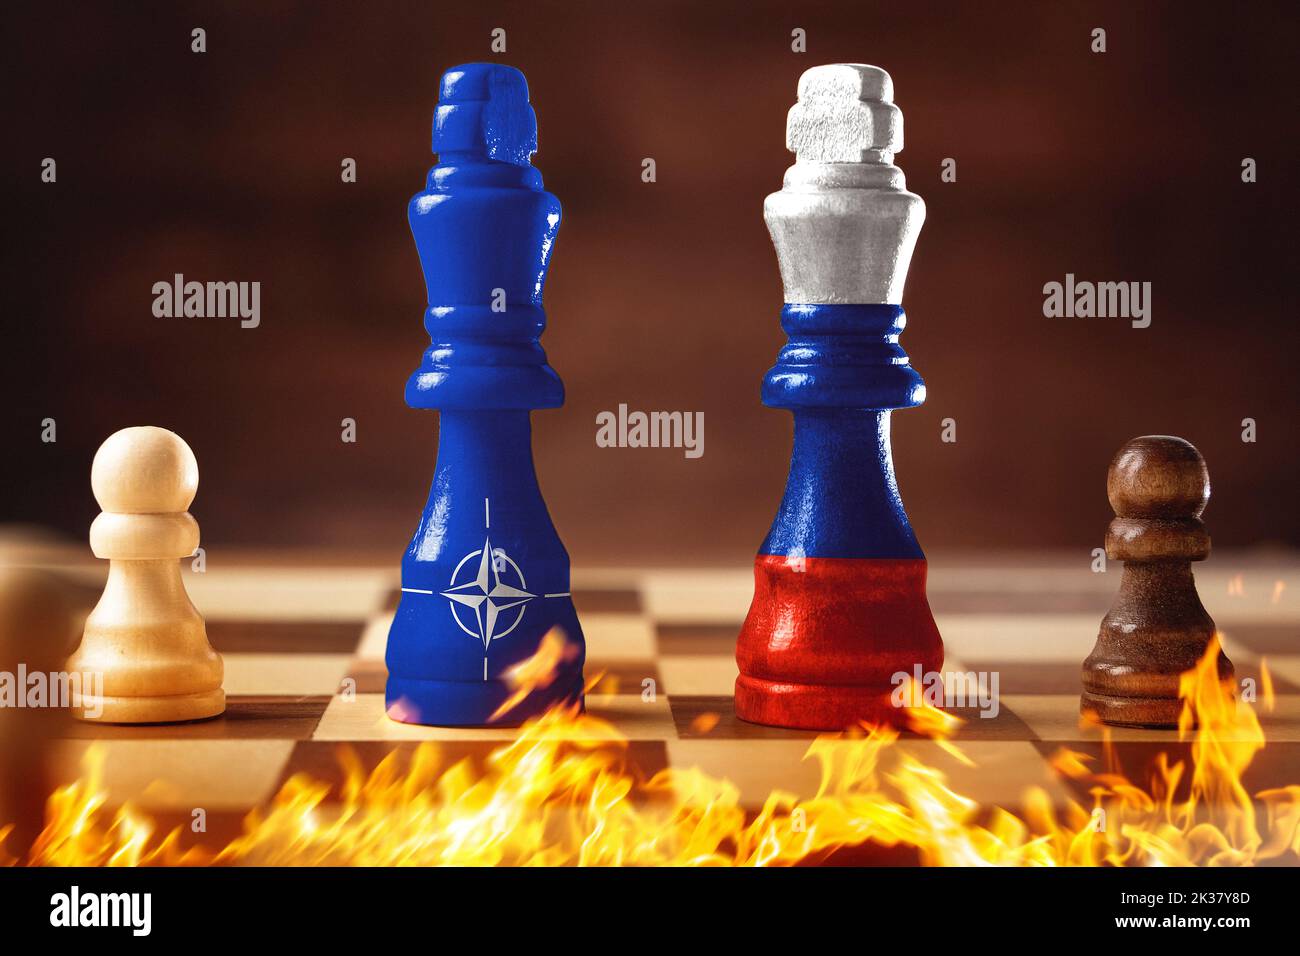 Chess Pieces Surrounded By Fire Symbol Image, Conflict And War Between NATO And Russia PHOTOMONTAGE Stock Photo